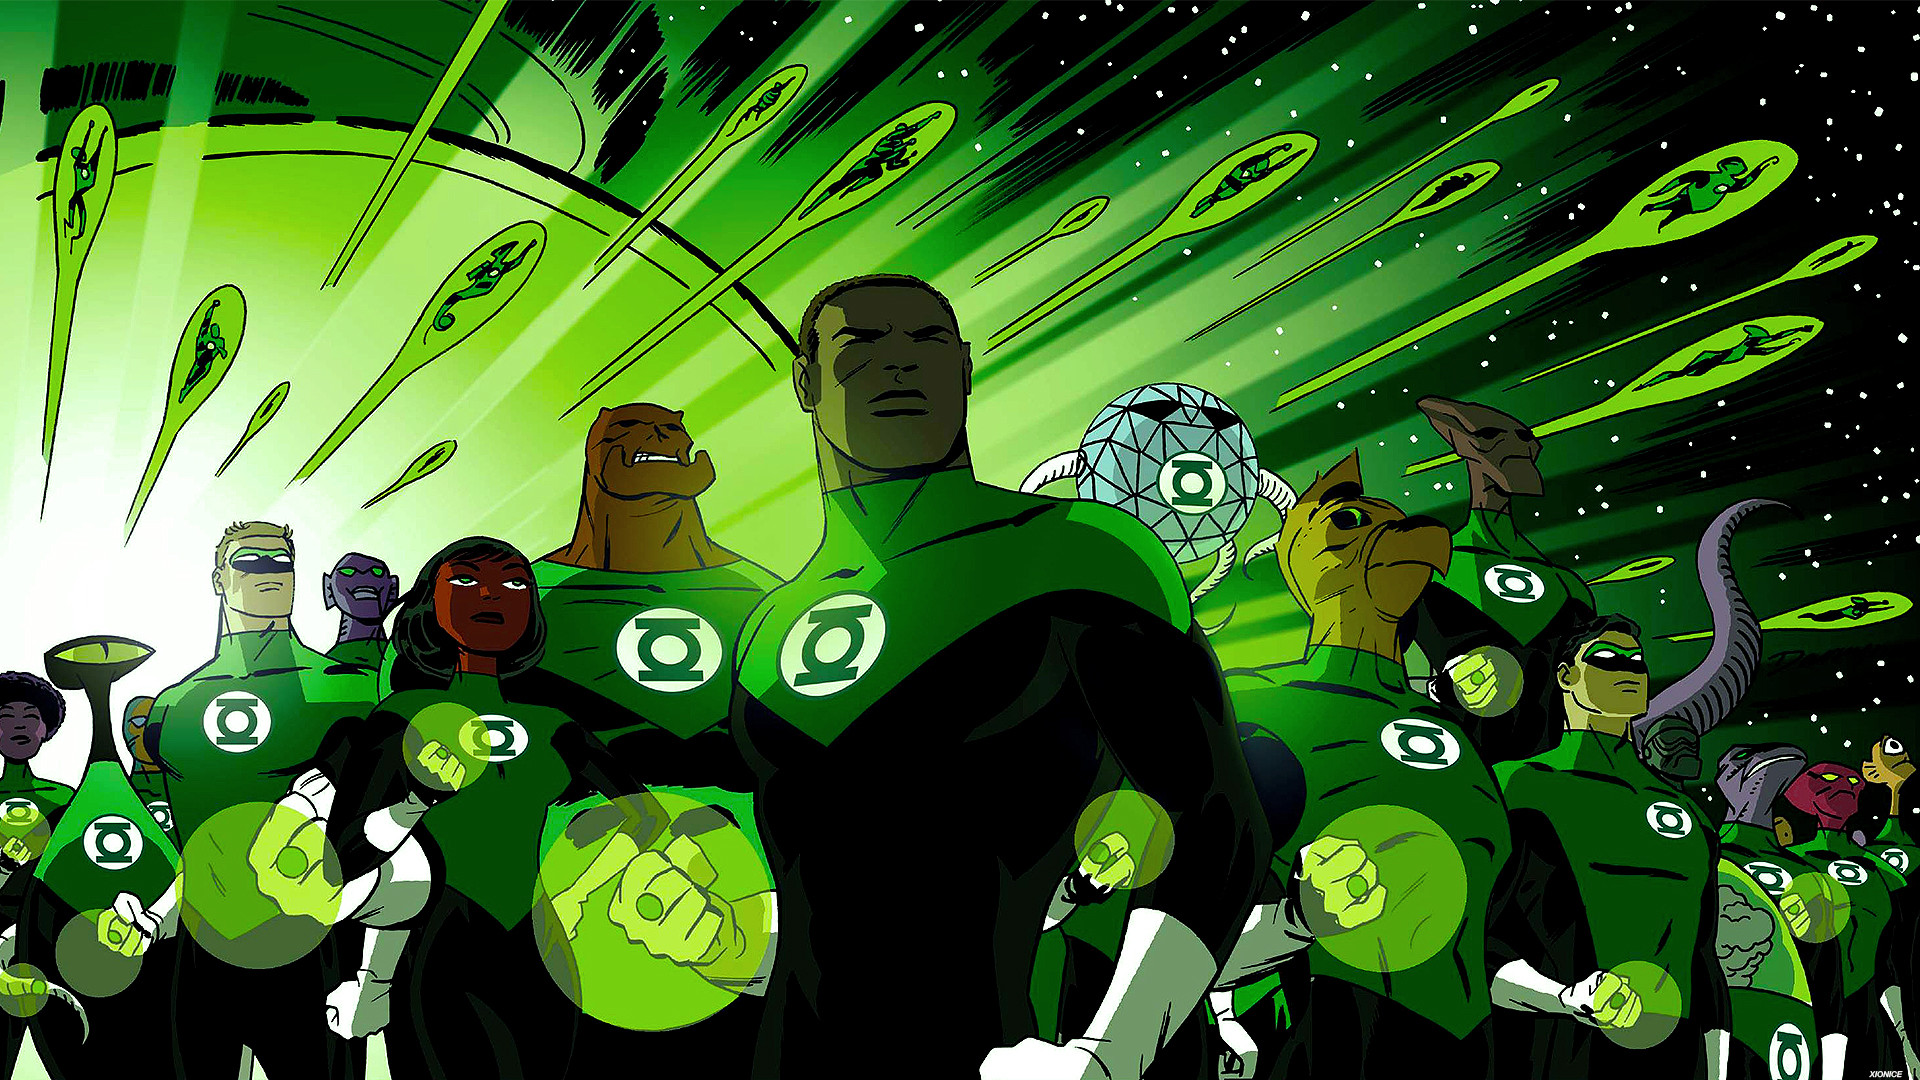 1920x1080 Green Lantern Corps by Xionice Green Lantern Corps by Xionice